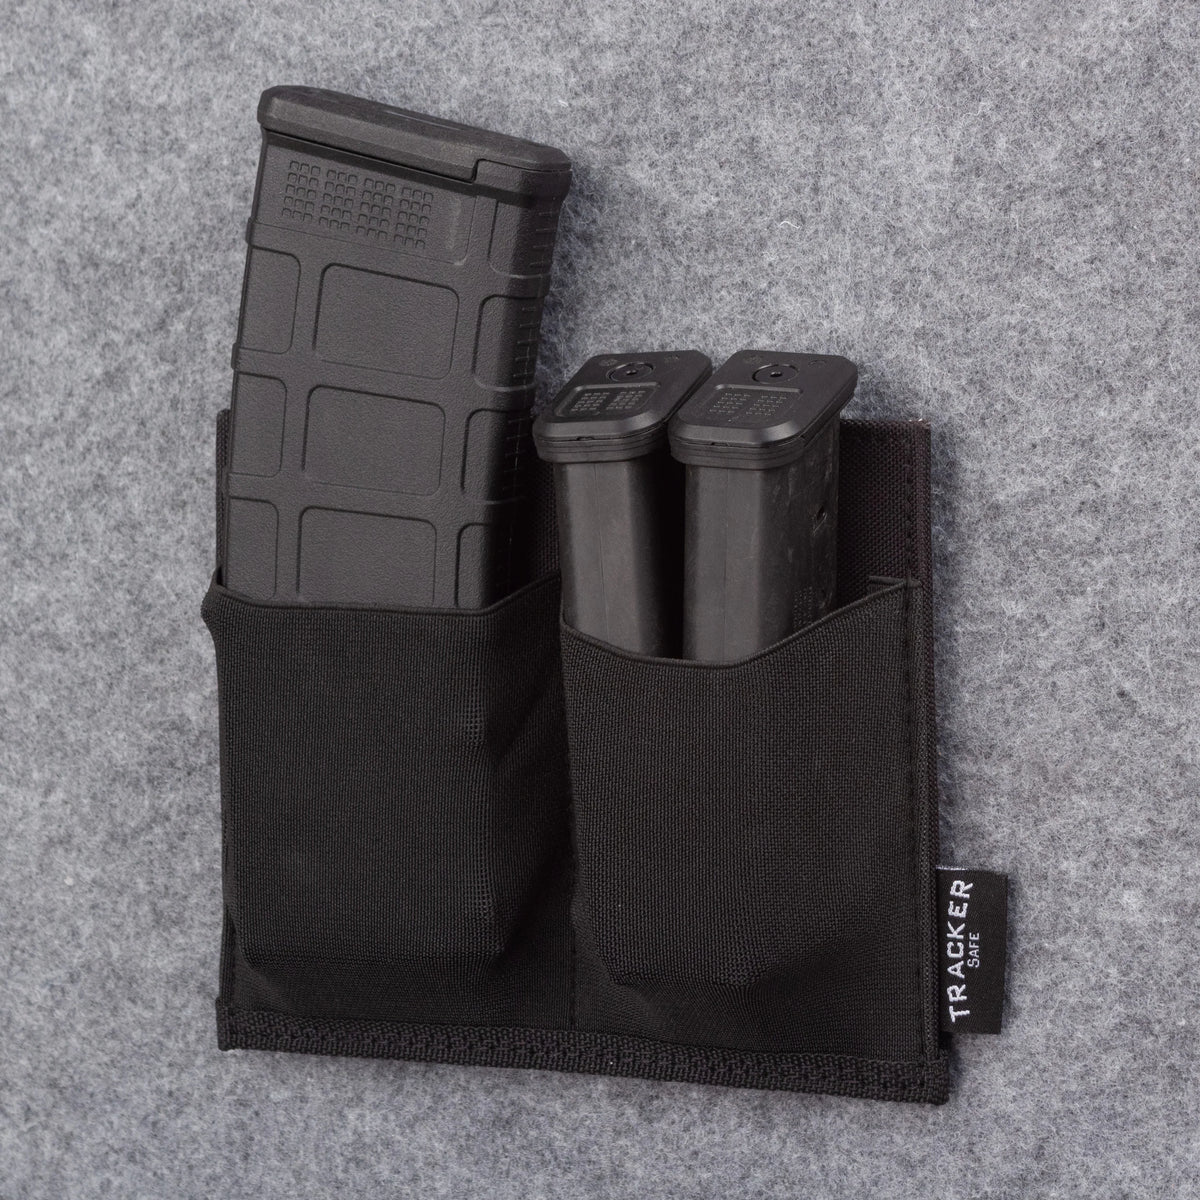 Tracker PE2 Pocket Elastic 2 Mag Holder With Mags 2